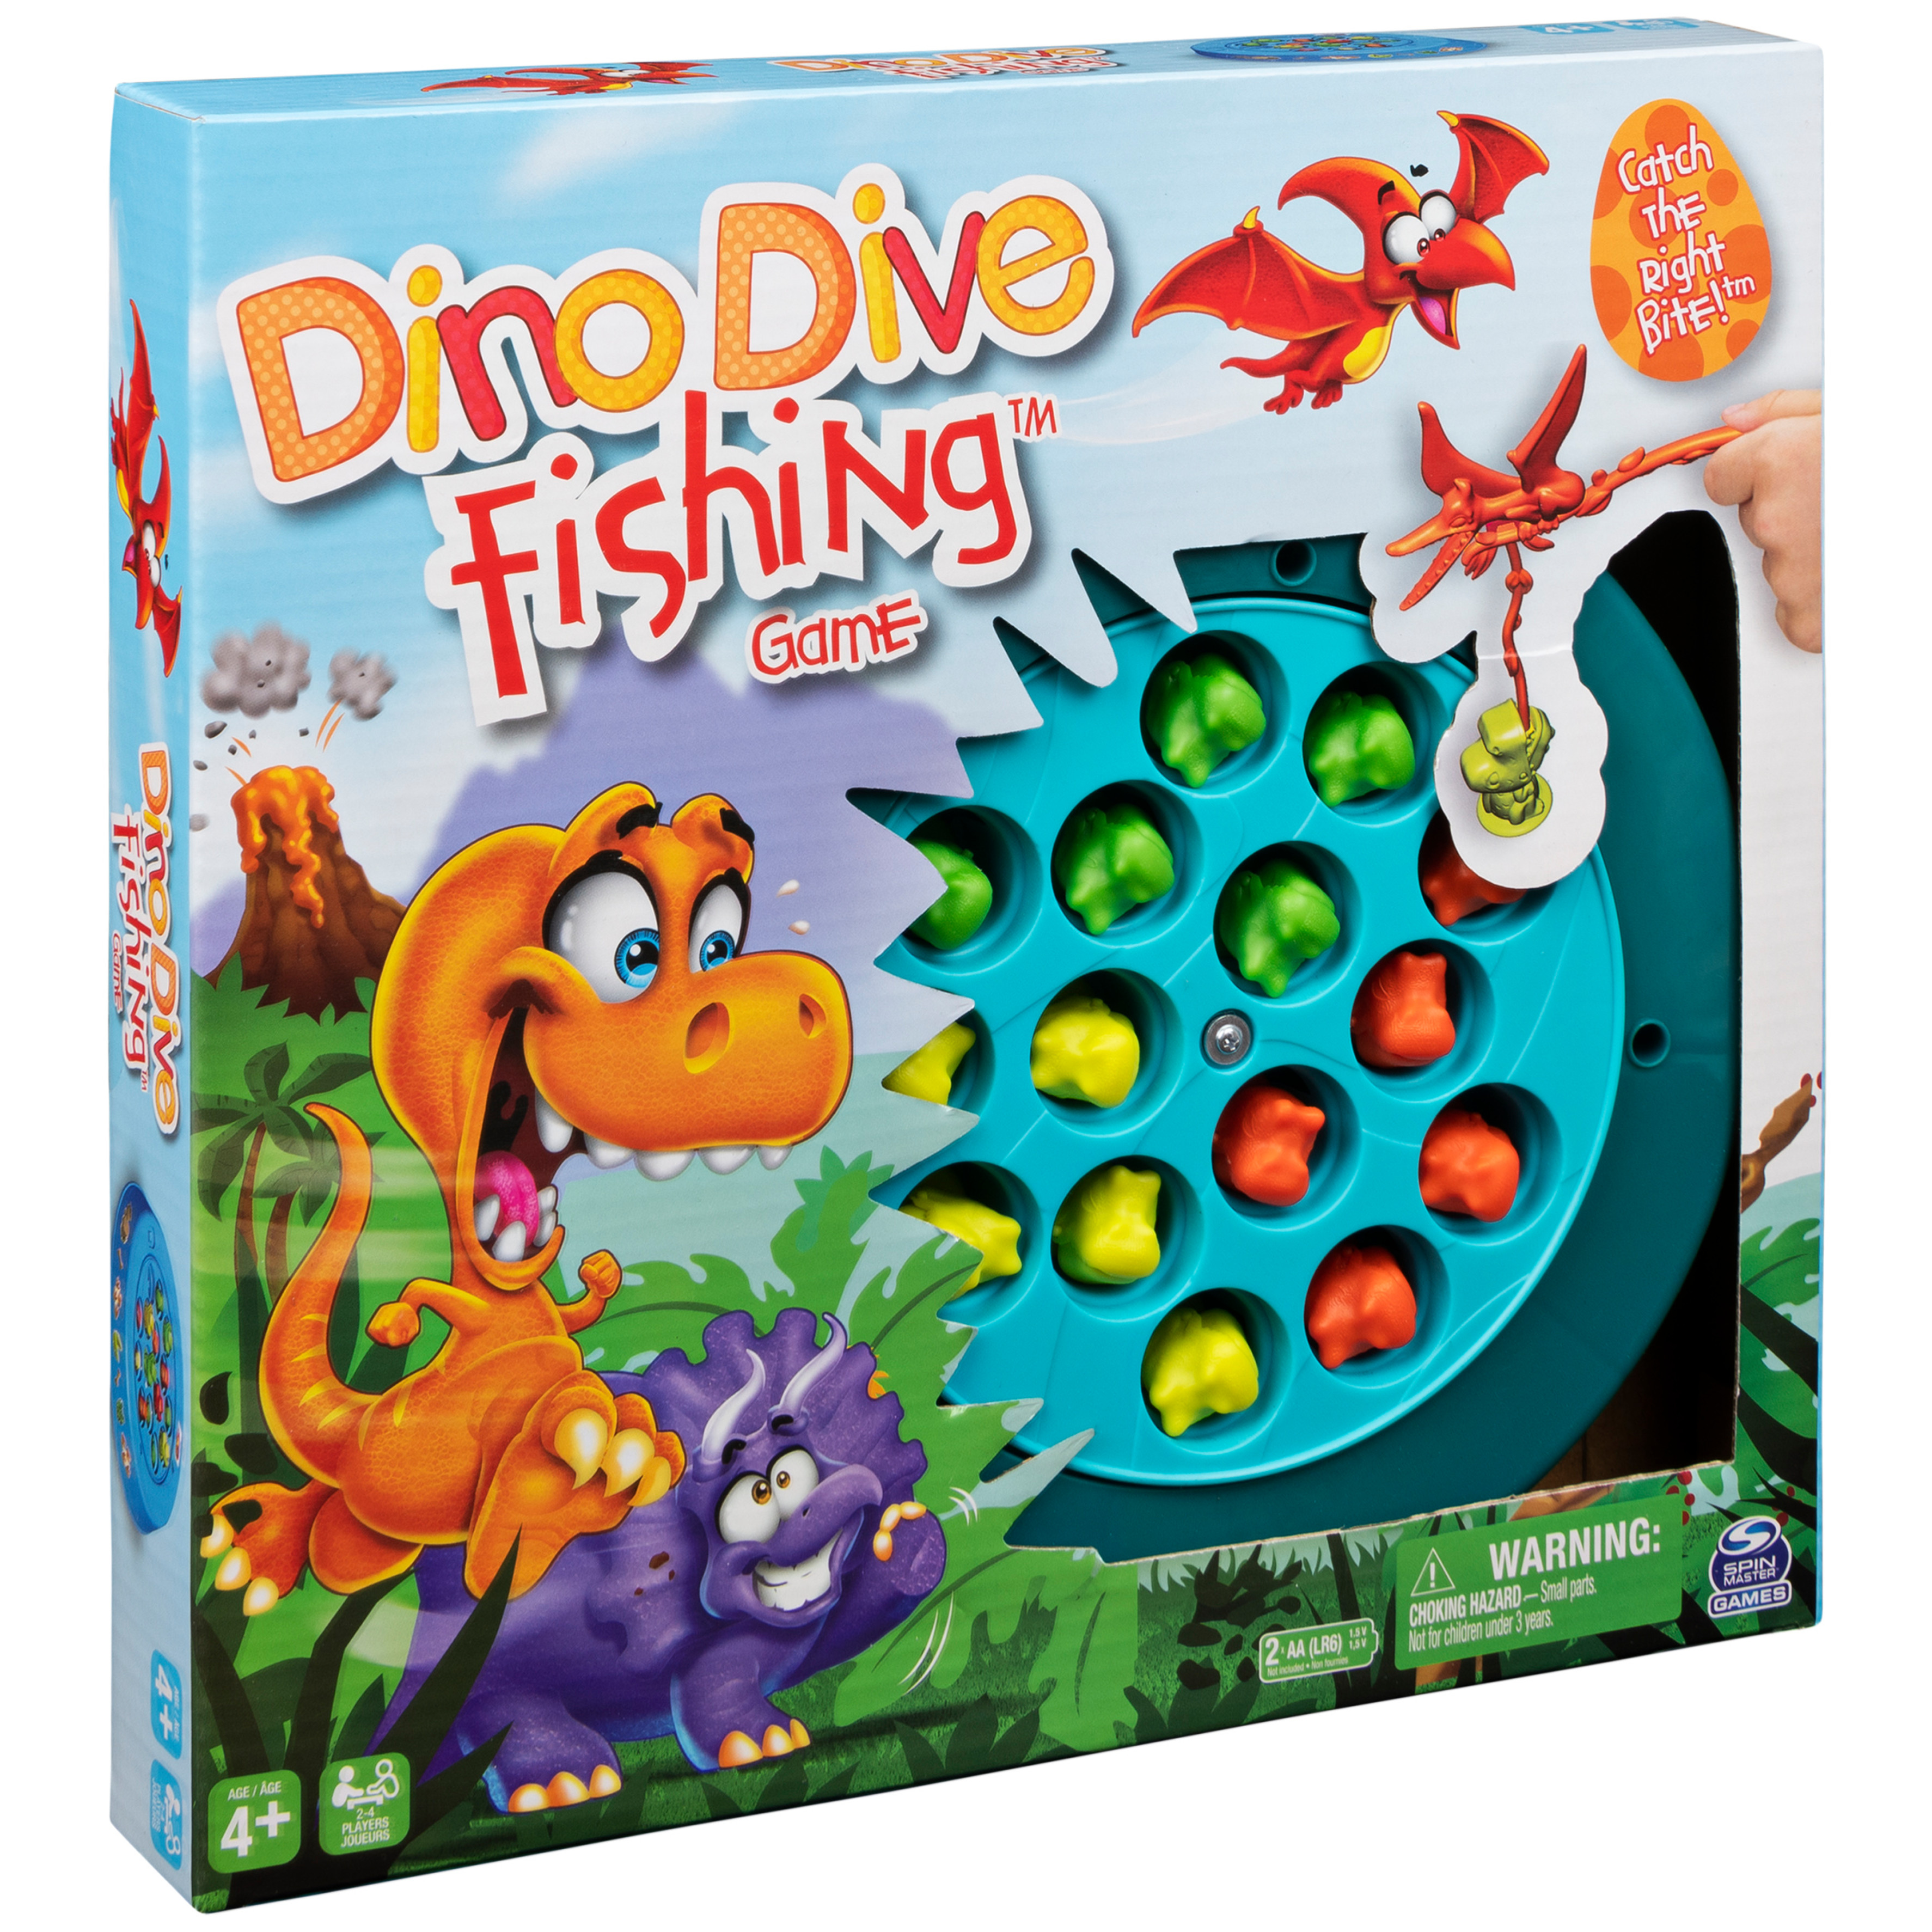 Dino Dive Fishing Game, Board Game for Kids Ages 4 and up - image 2 of 6